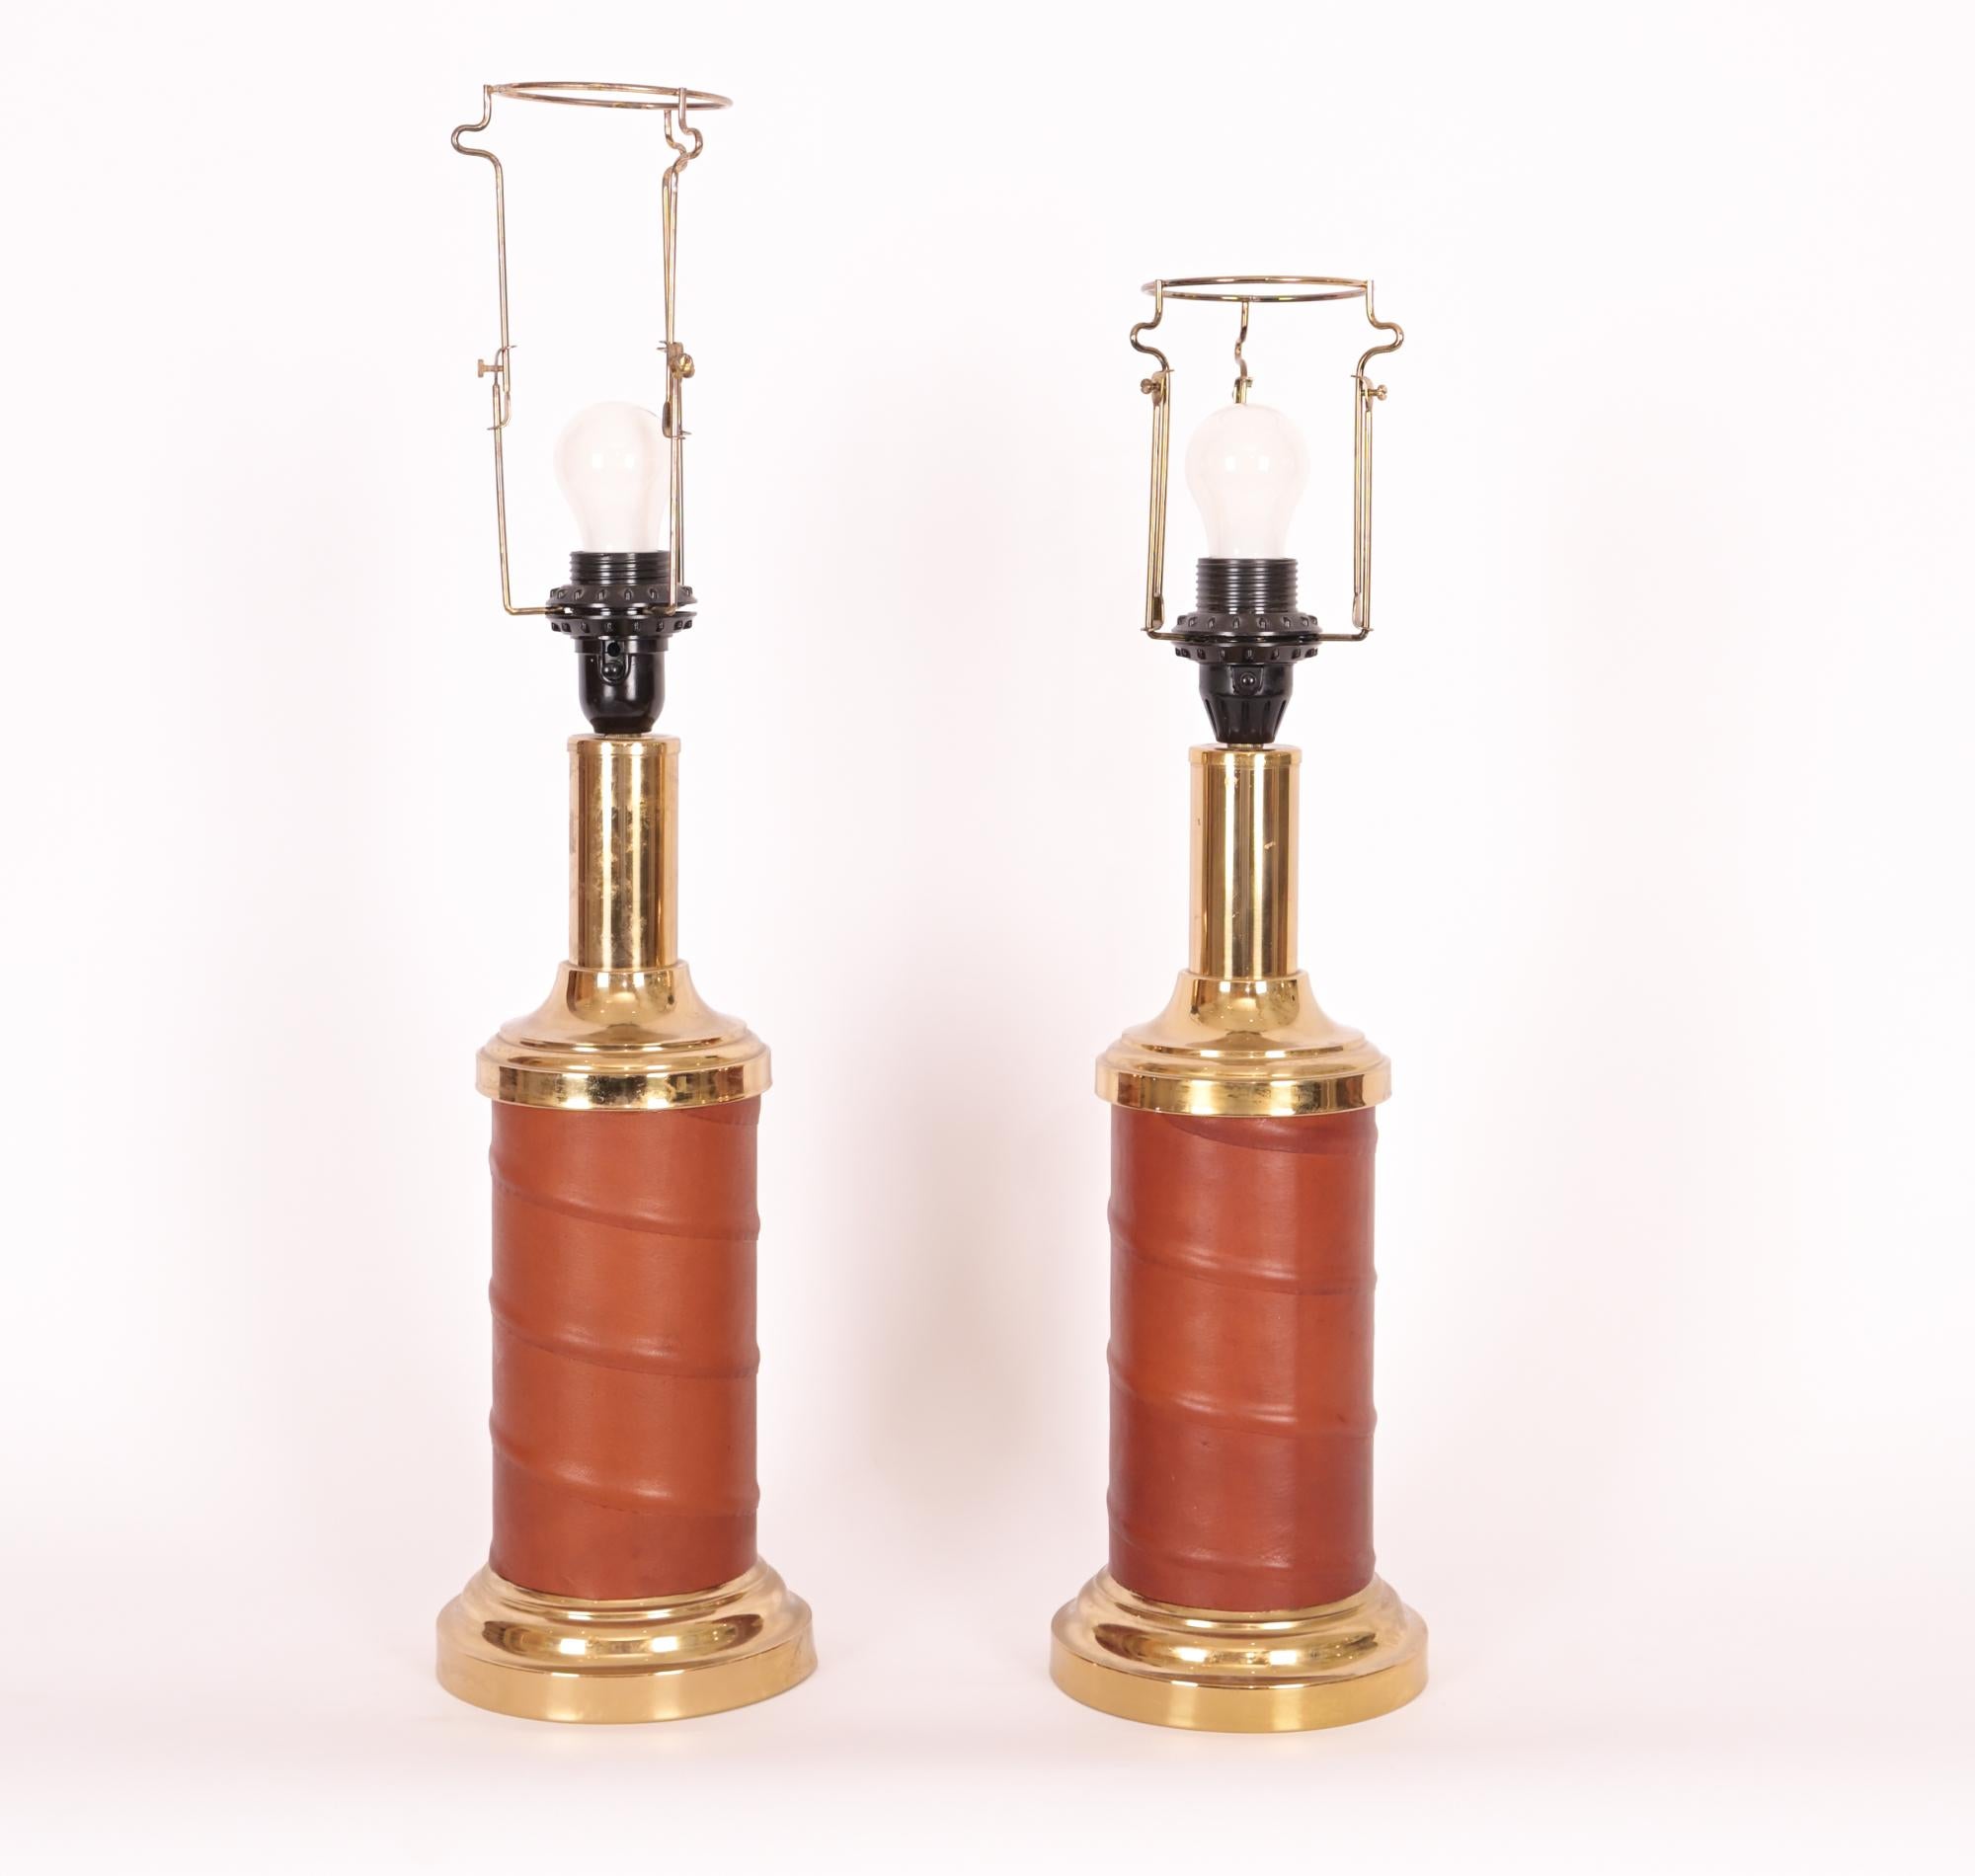 Brass lamps with a deep orche leather wrapping around the center of the base in a downward spiral. Made by the Swedish Lighting and Design Company Bergboms (1940-) with labeling underneath, circa 1960.

Lamp shades not included

Shade rest